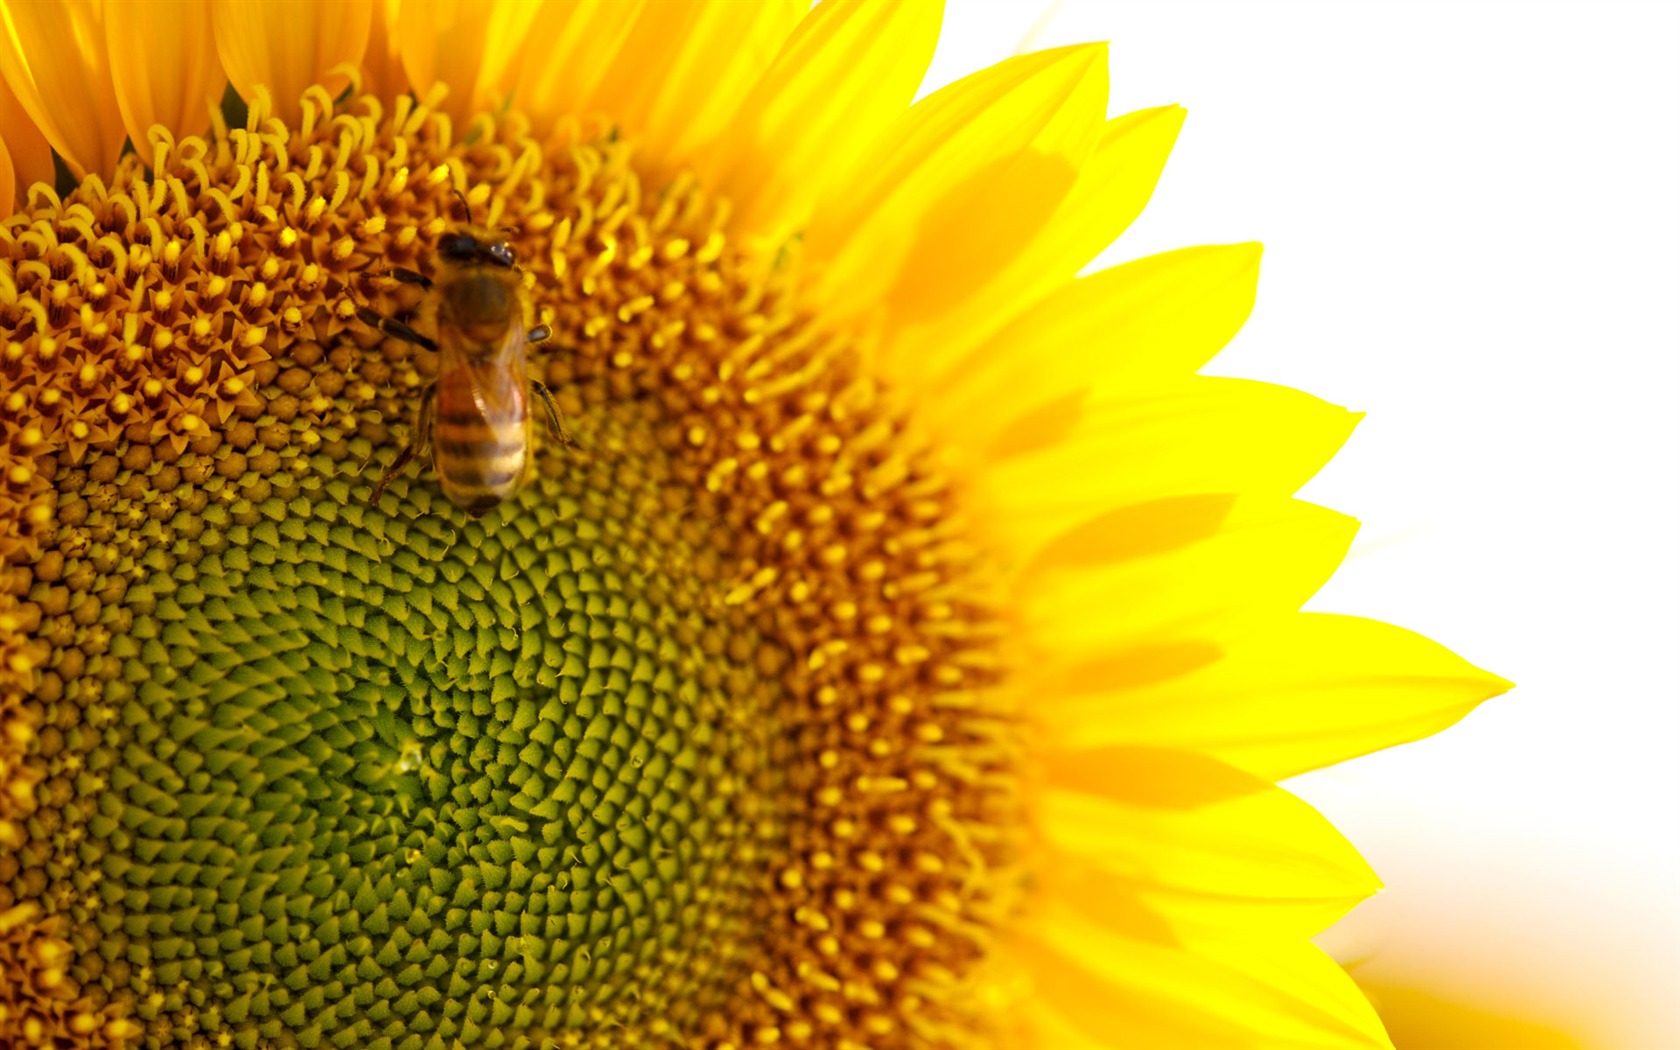 Sunny sunflower photo HD Wallpapers #33 - 1680x1050